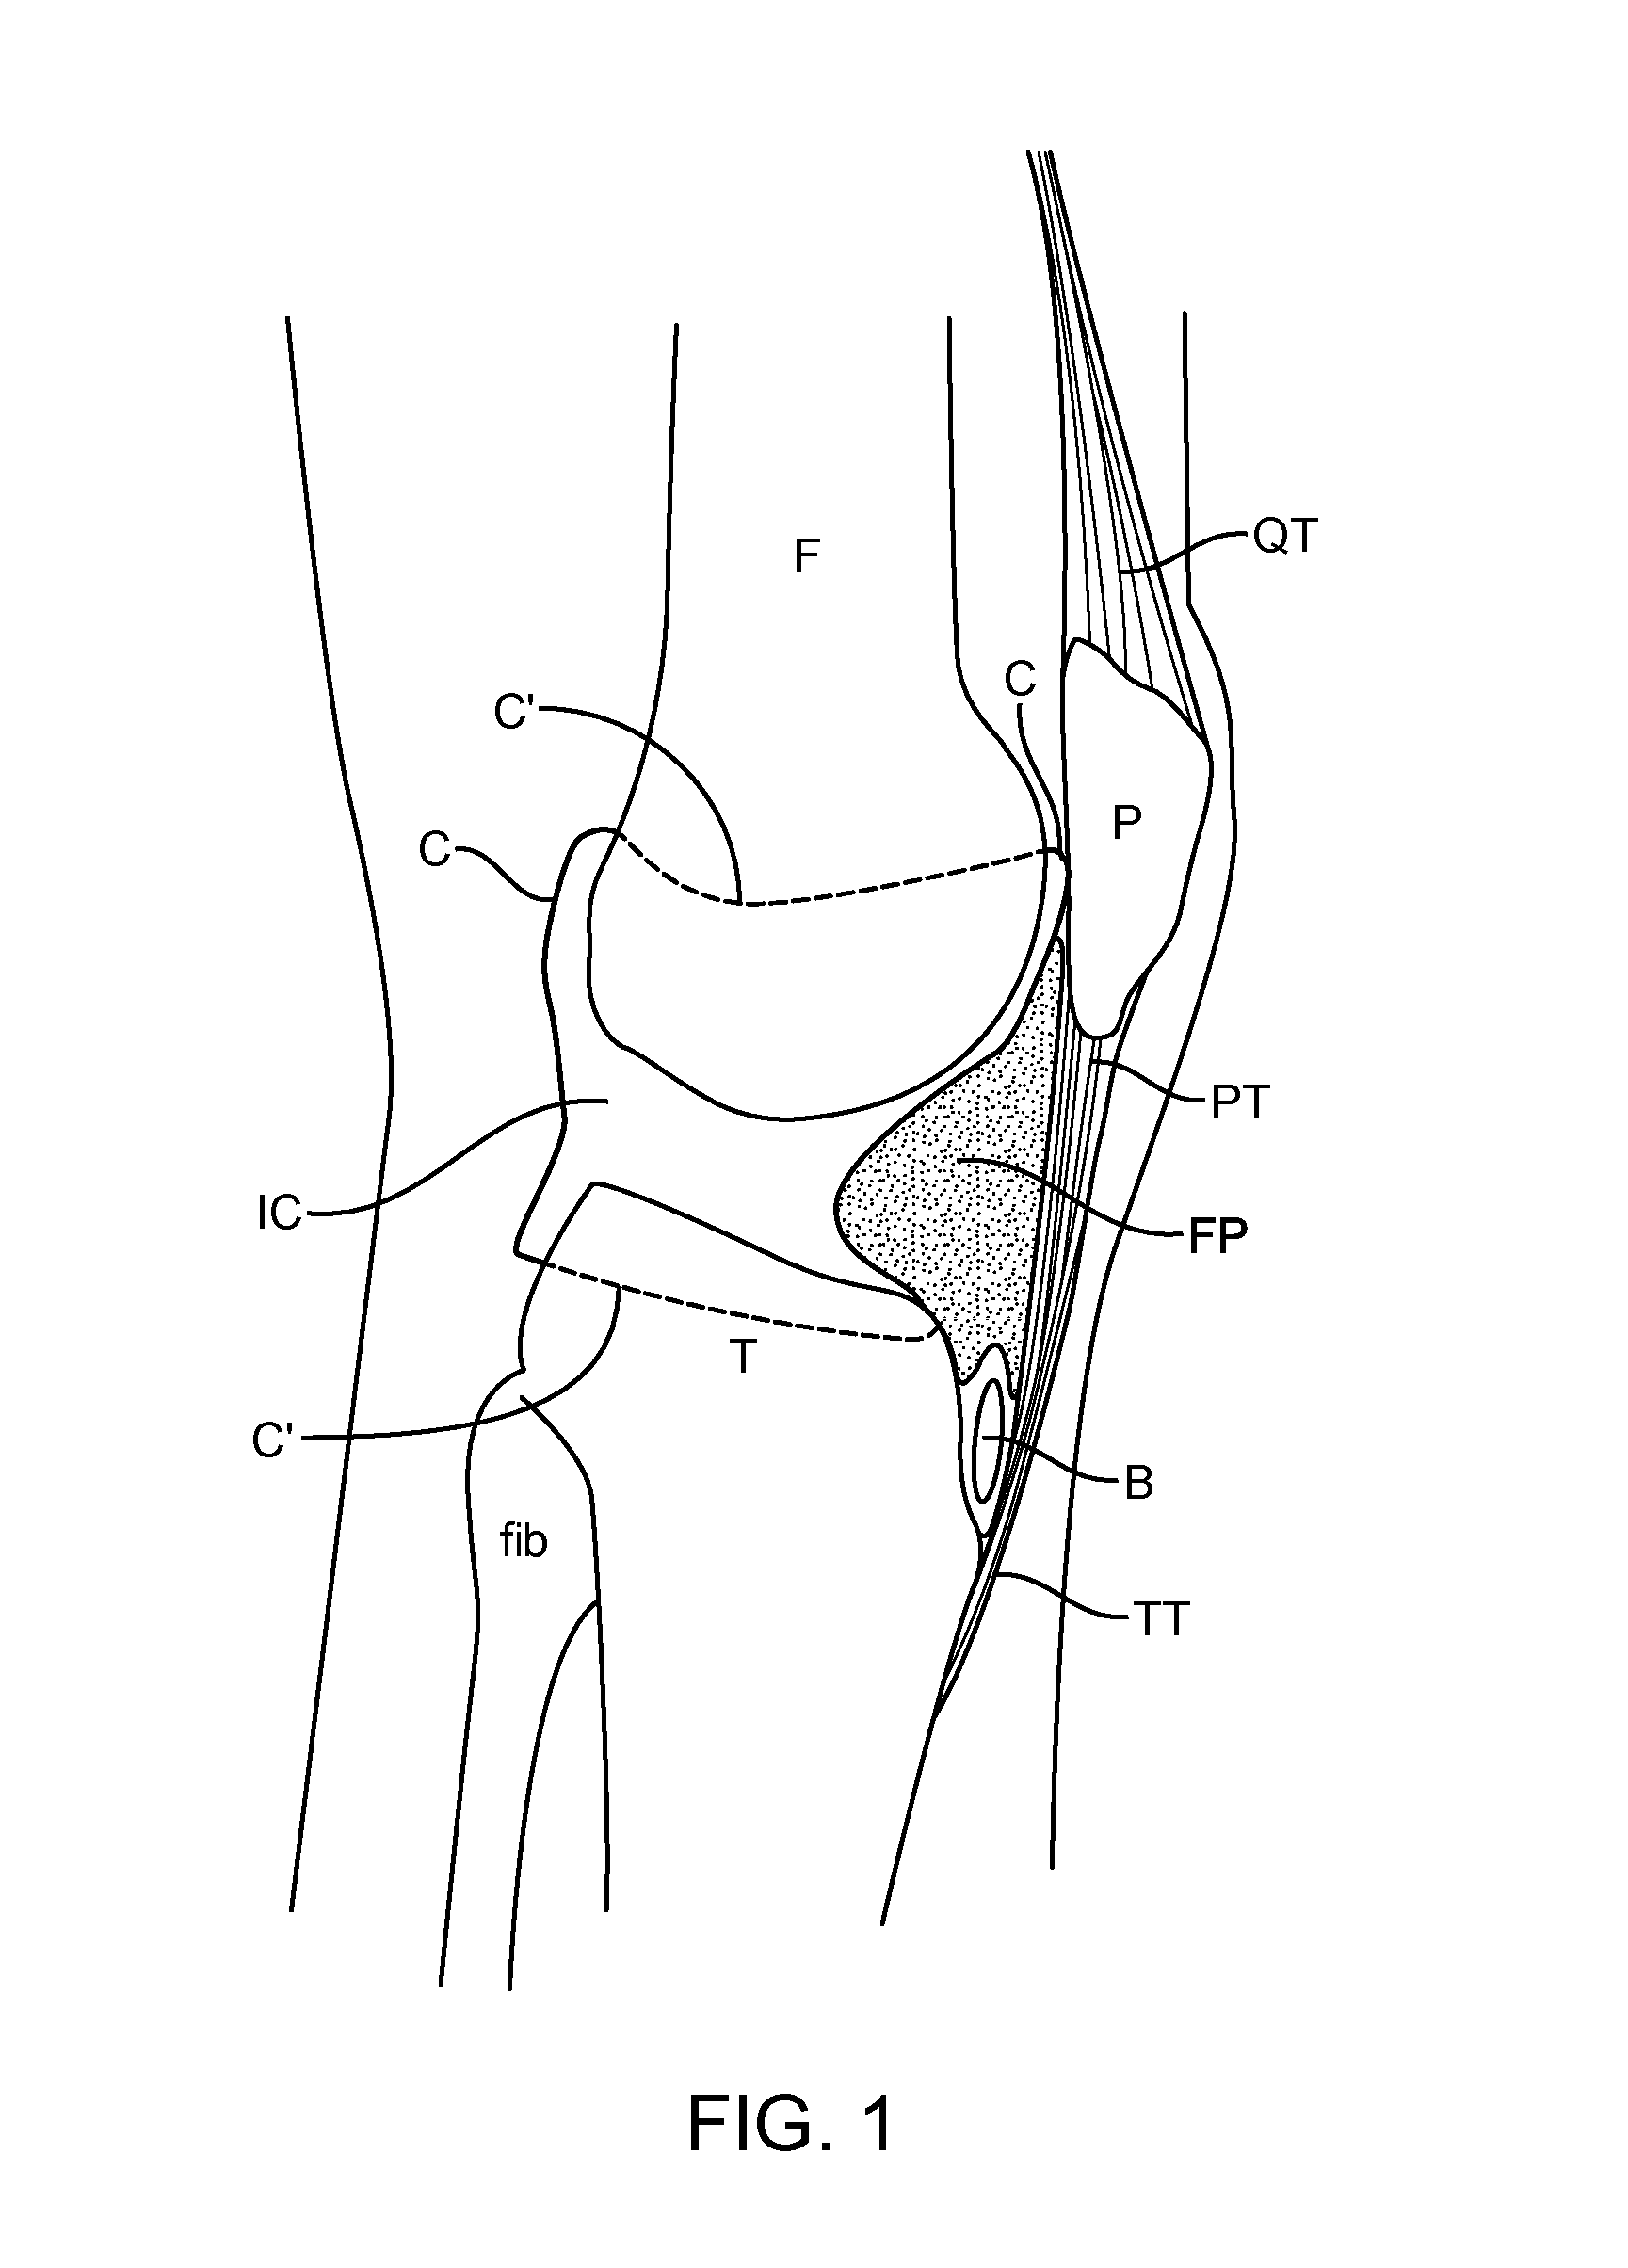 Apparatus and methods for treatment of patellofemoral conditions